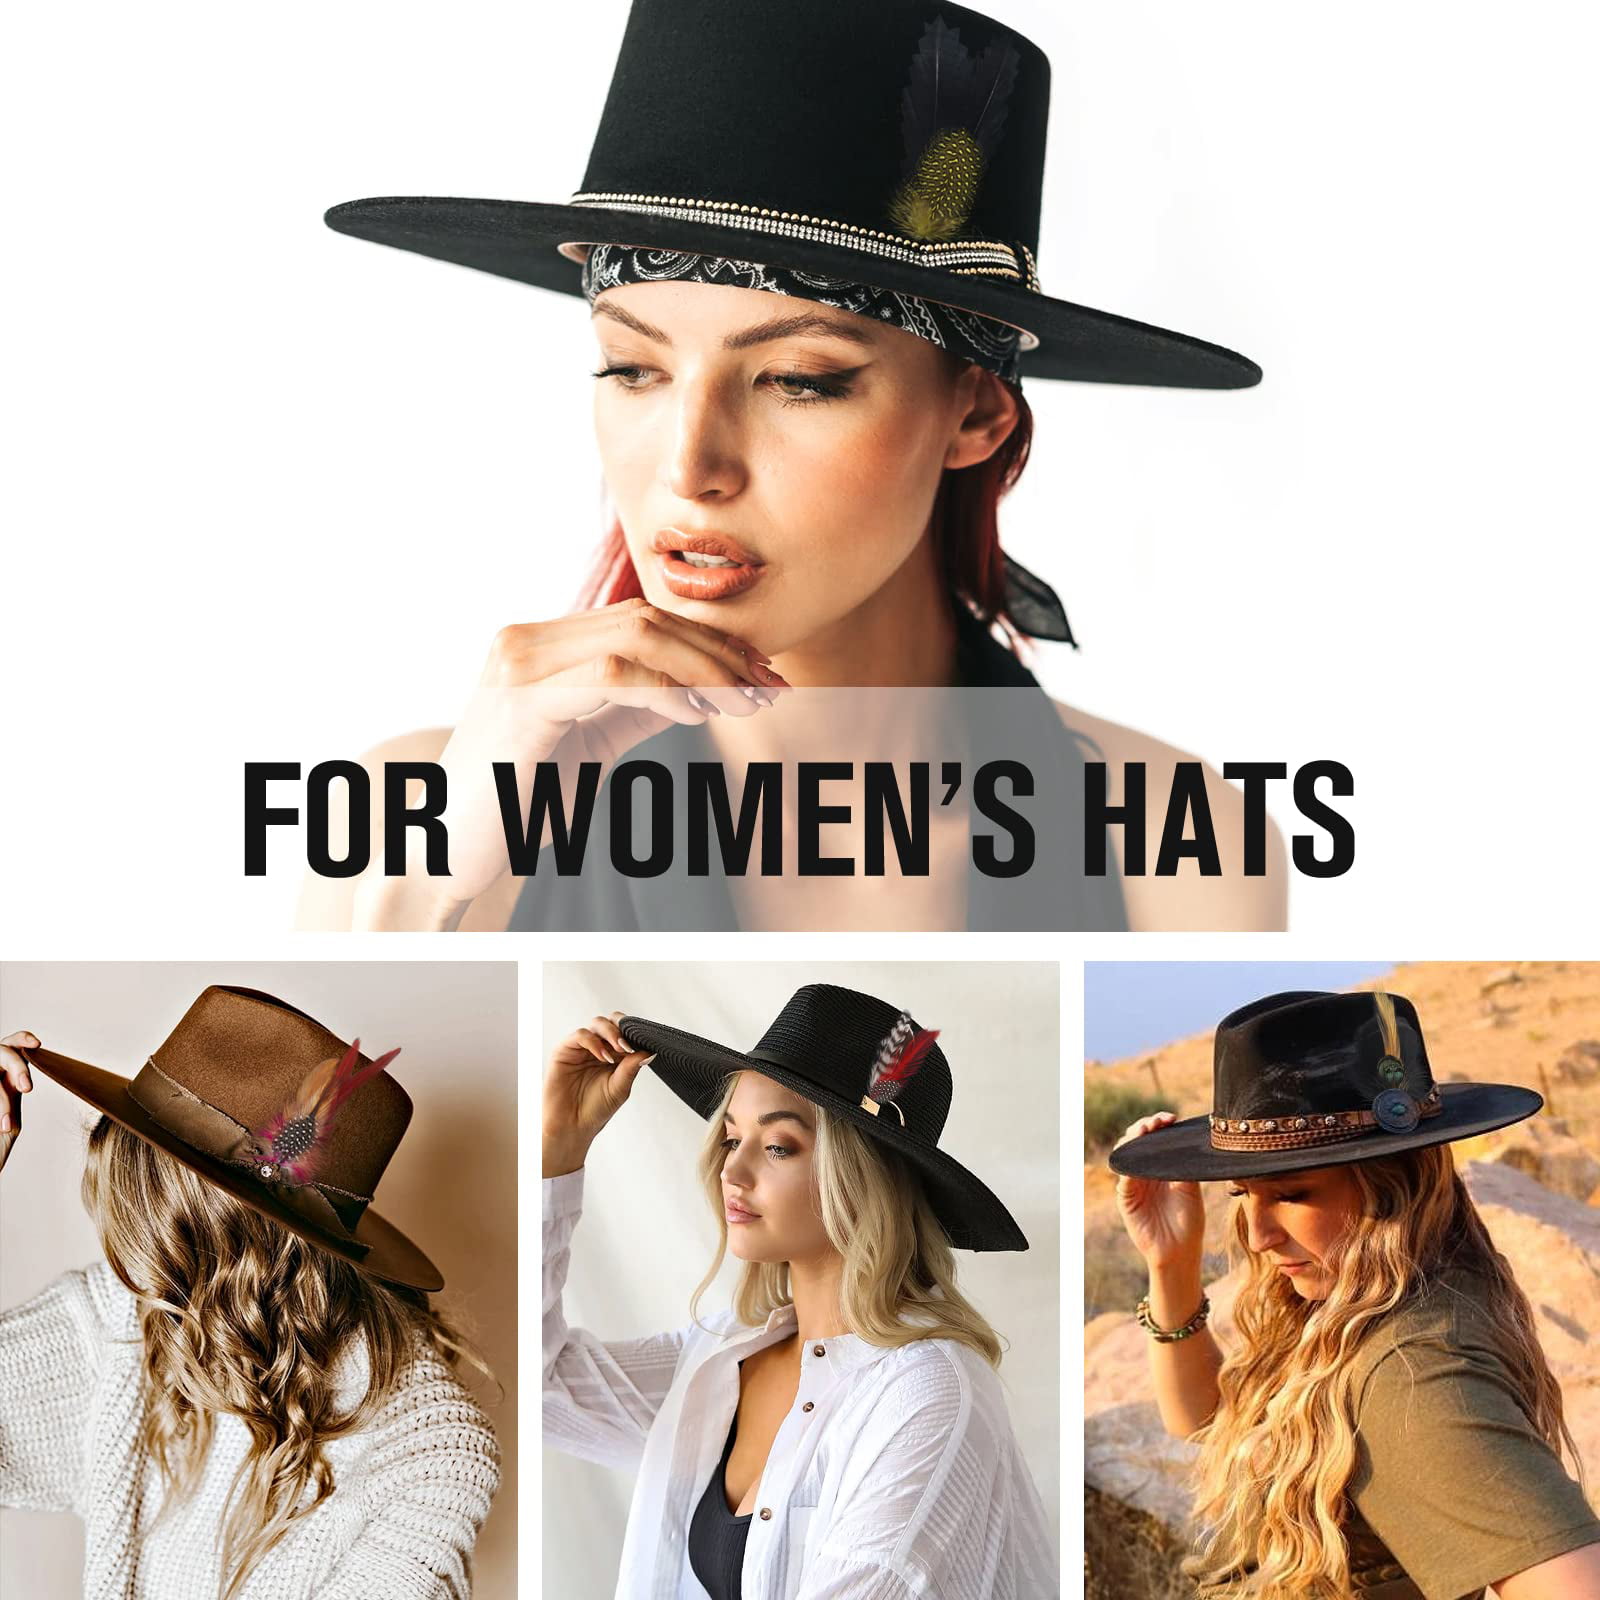 Frijpack Hat Feathers Hat Accessories Natural Feather Packs Accessories for Fedora Cowboy Hats, Pork Pie Trilby Hats